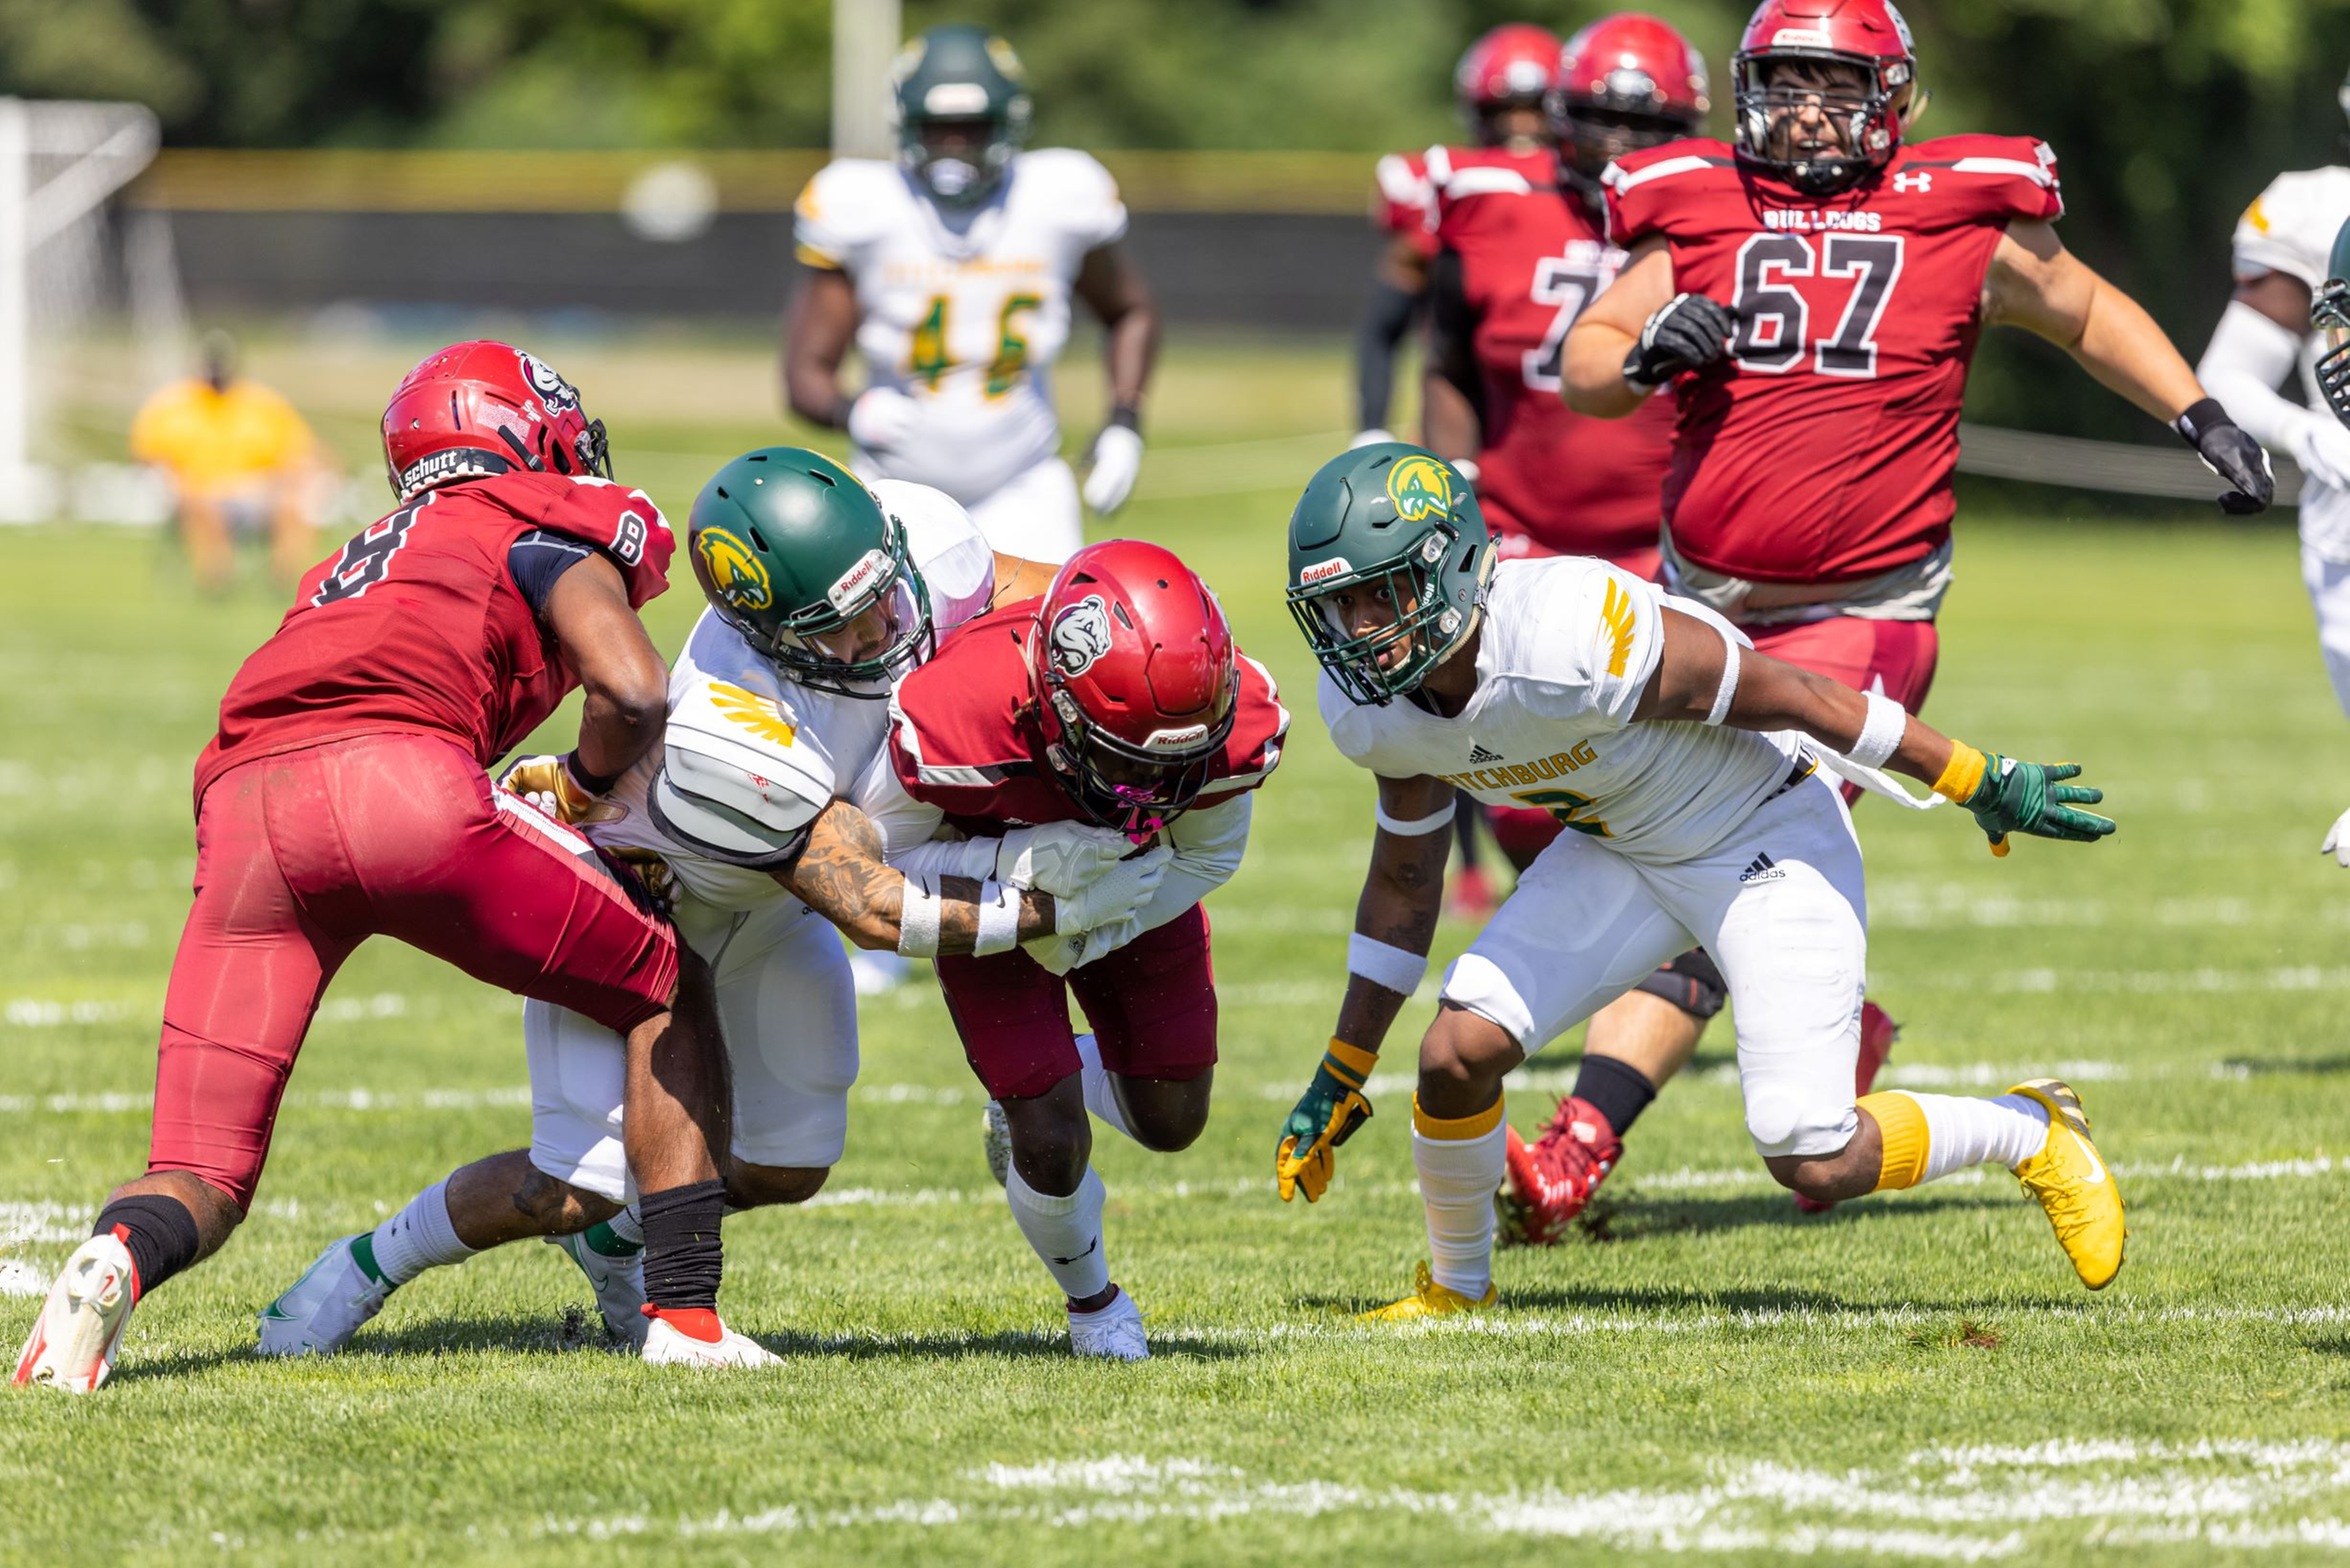 Falcons Fall to Rams in MASCAC Clash